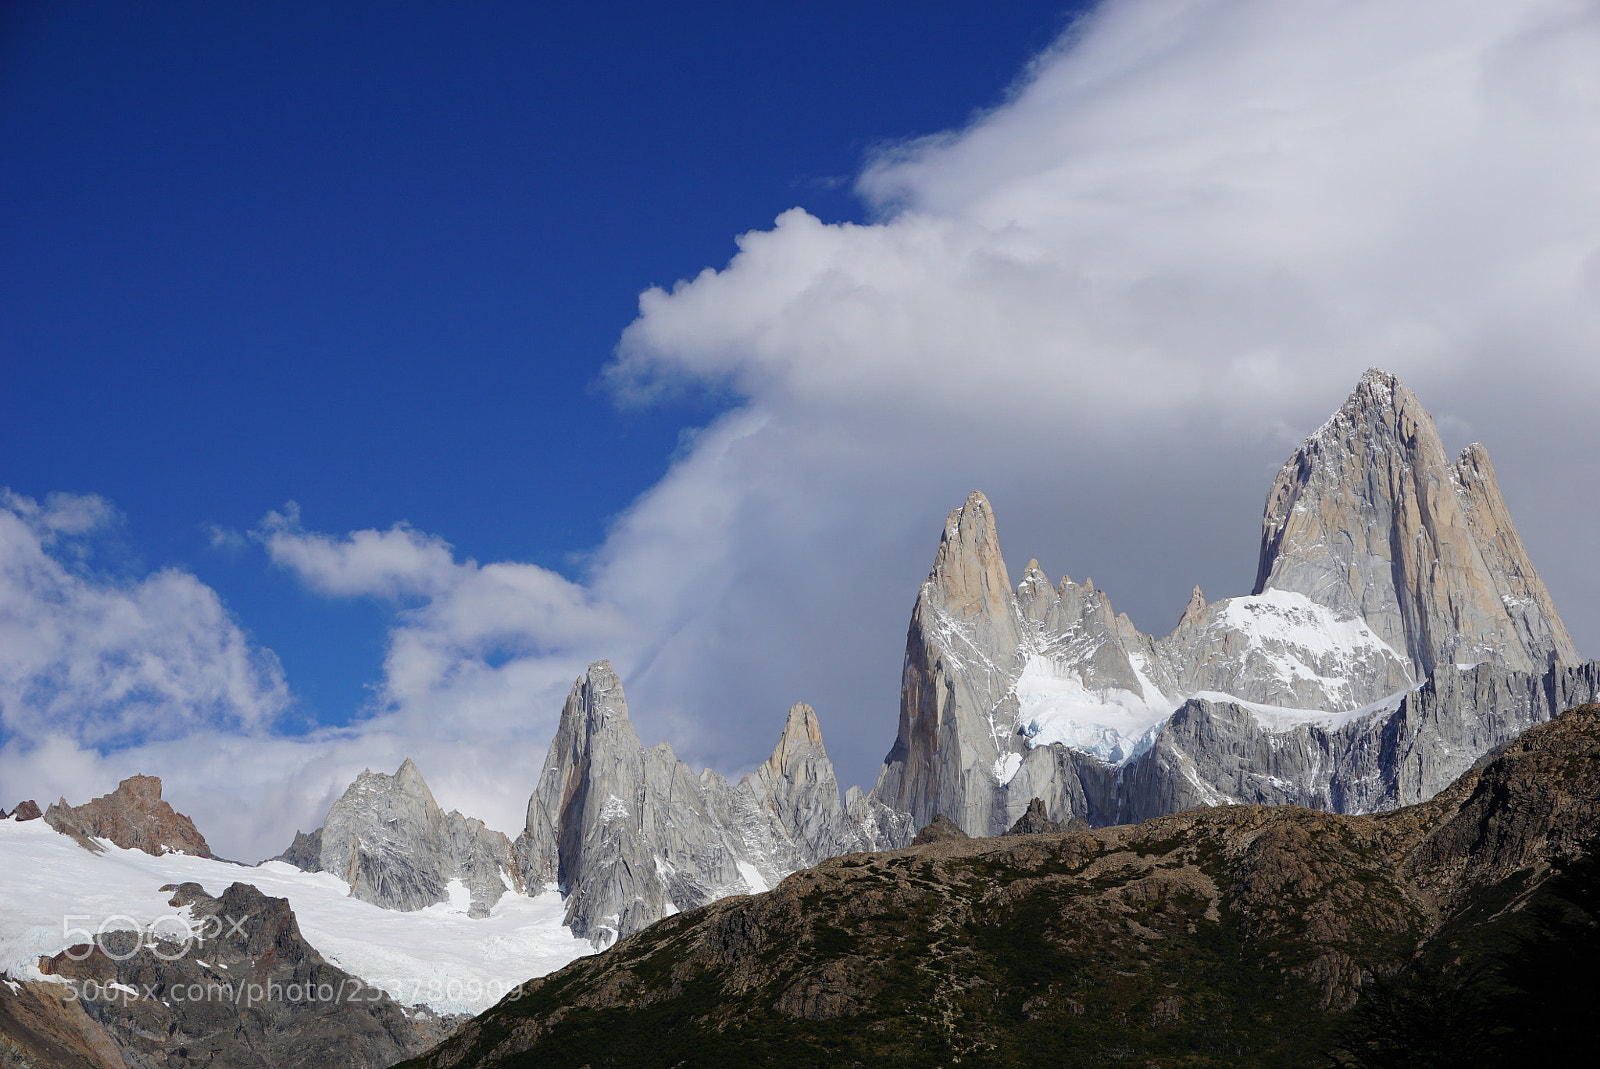 Sony a6000 sample photo. Monte fitz roy patagonia photography